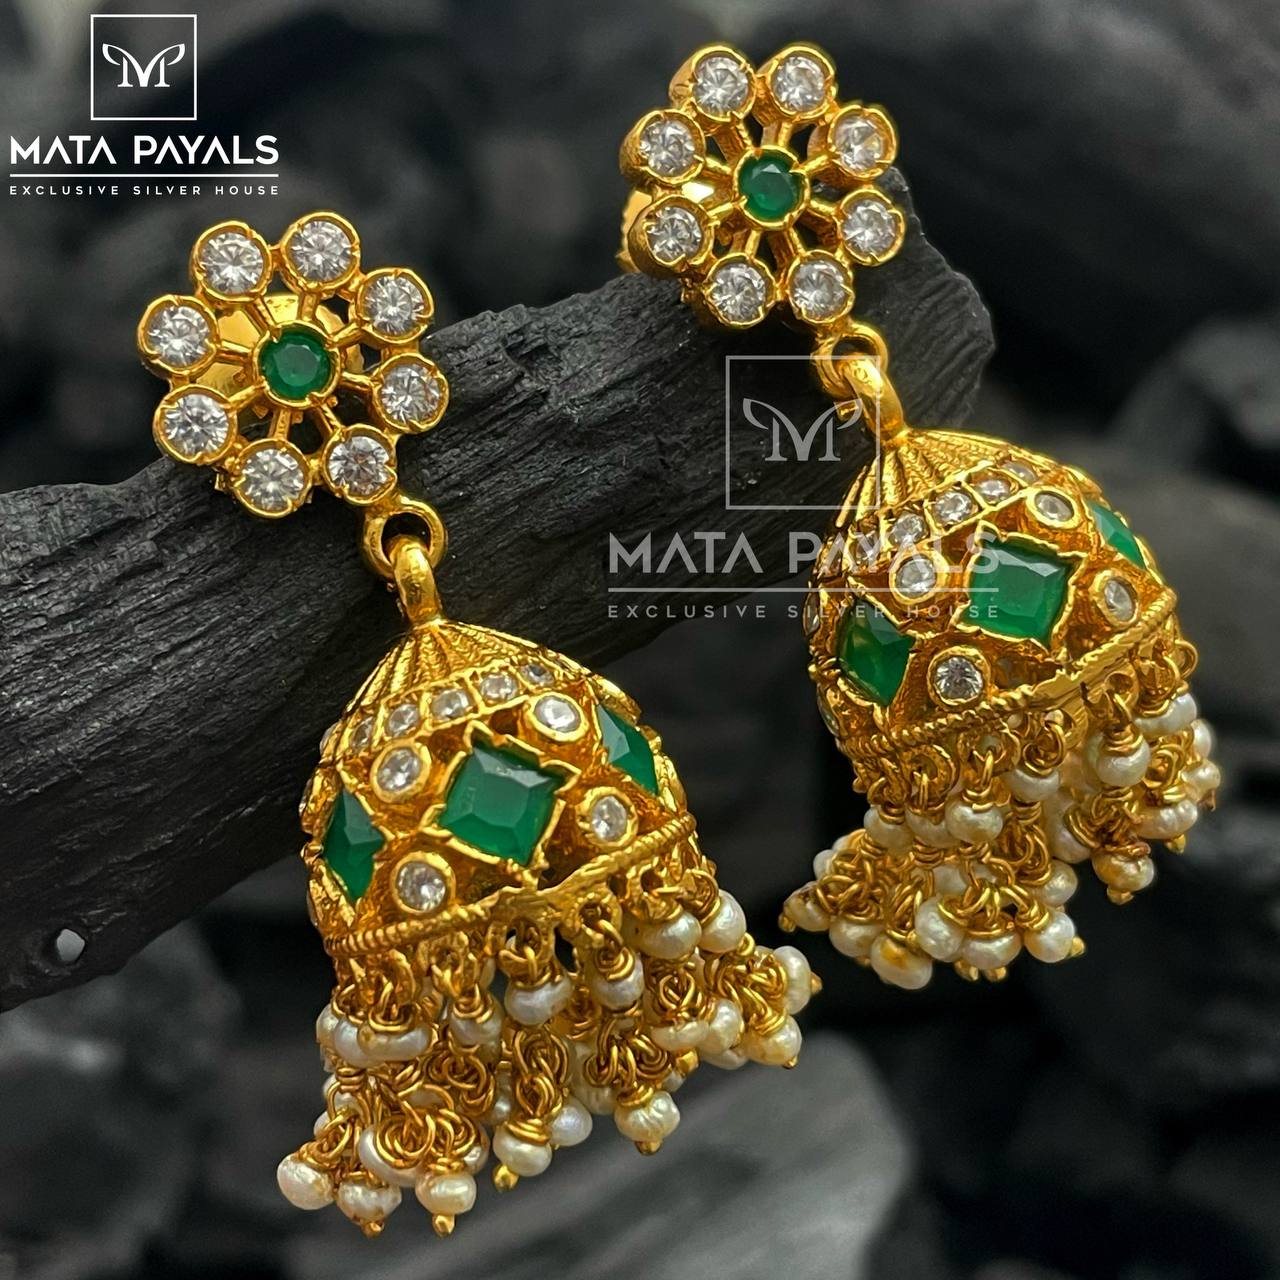 Silver Gold Plated Jhumka's - Mata Payals Exclusive Silver Jewellery